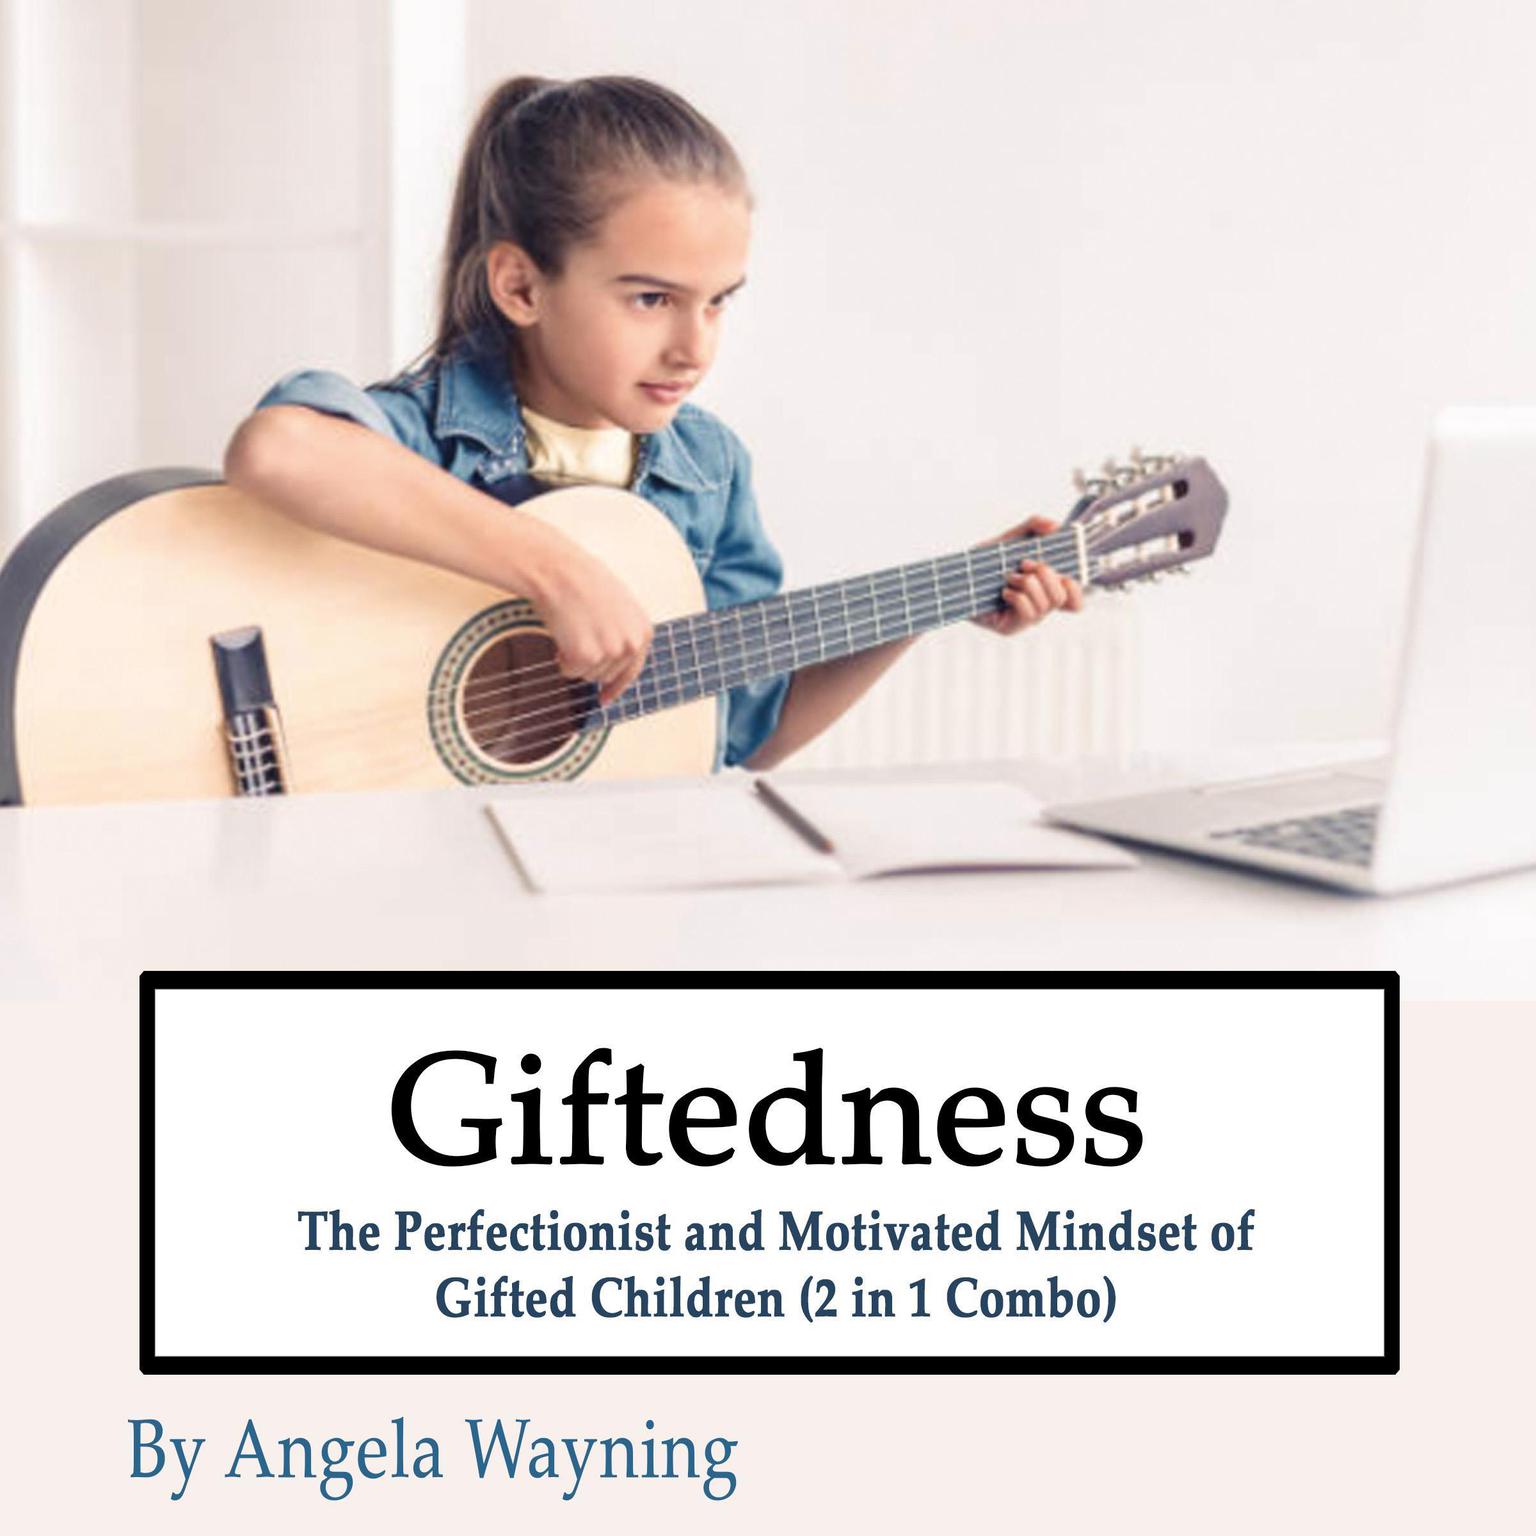 Giftedness: The Perfectionist and Motivated Mindset of Gifted Children (2 in 1 Combo) Audiobook, by Angela Wayning